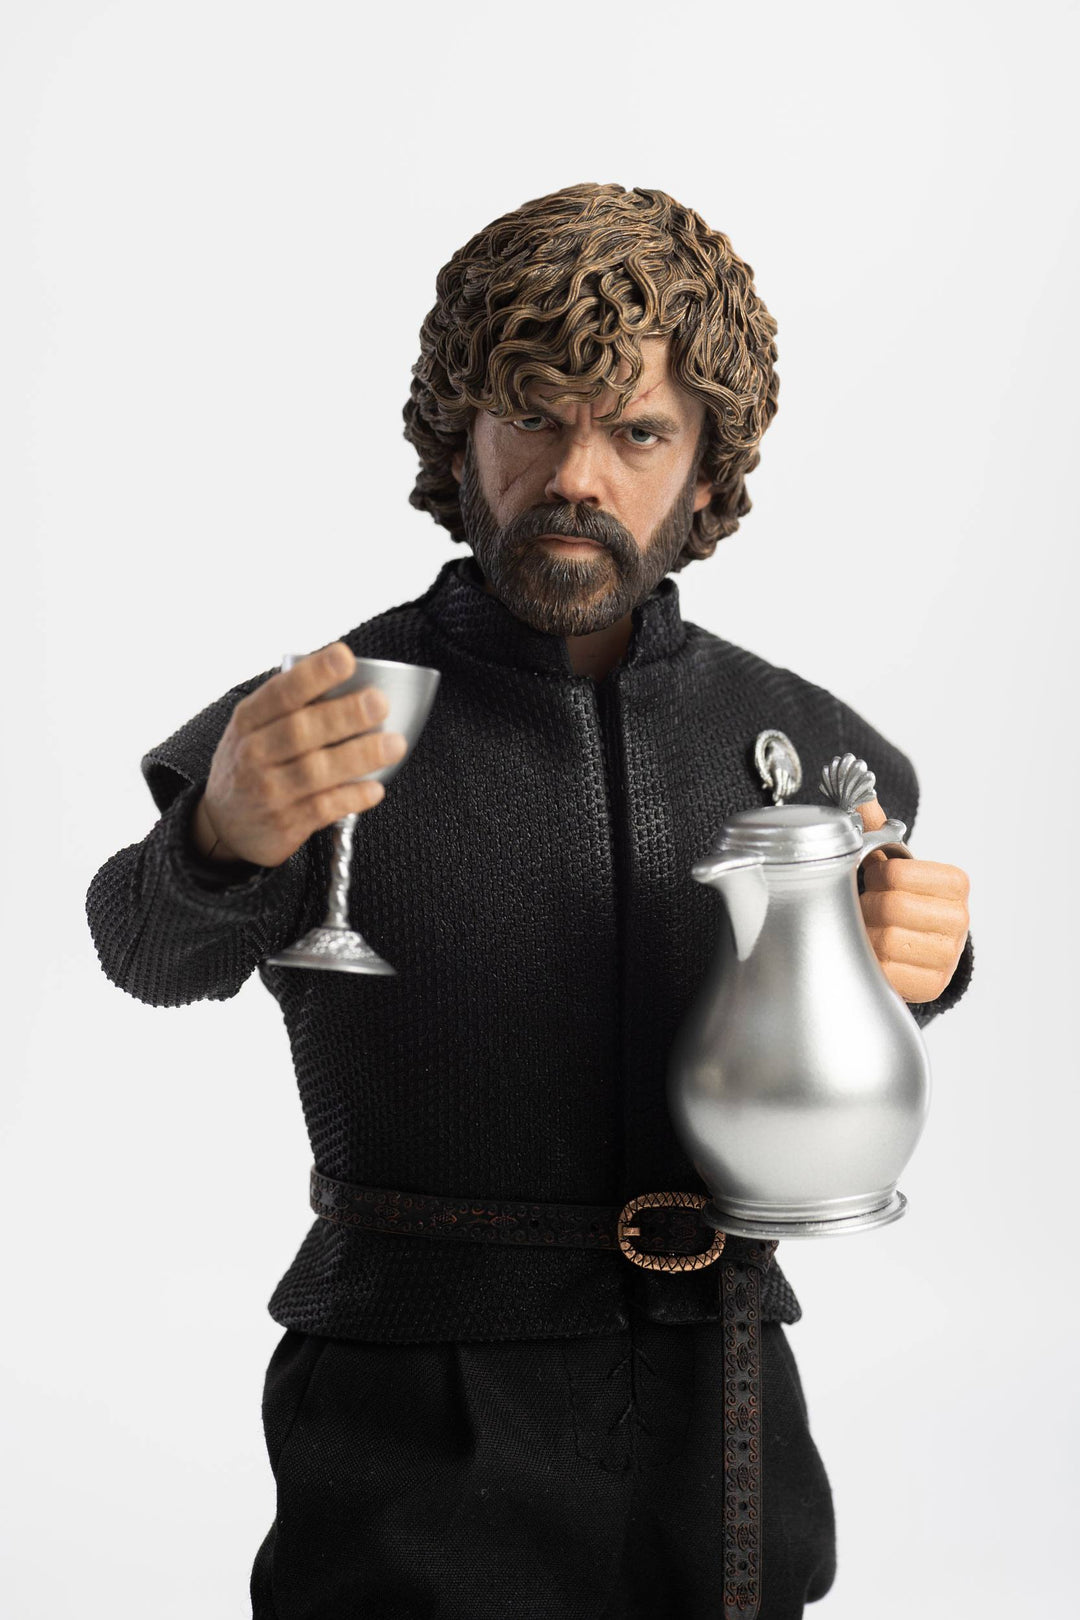 Game of Thrones Tyrion Lannister 1/6 Scale Figure